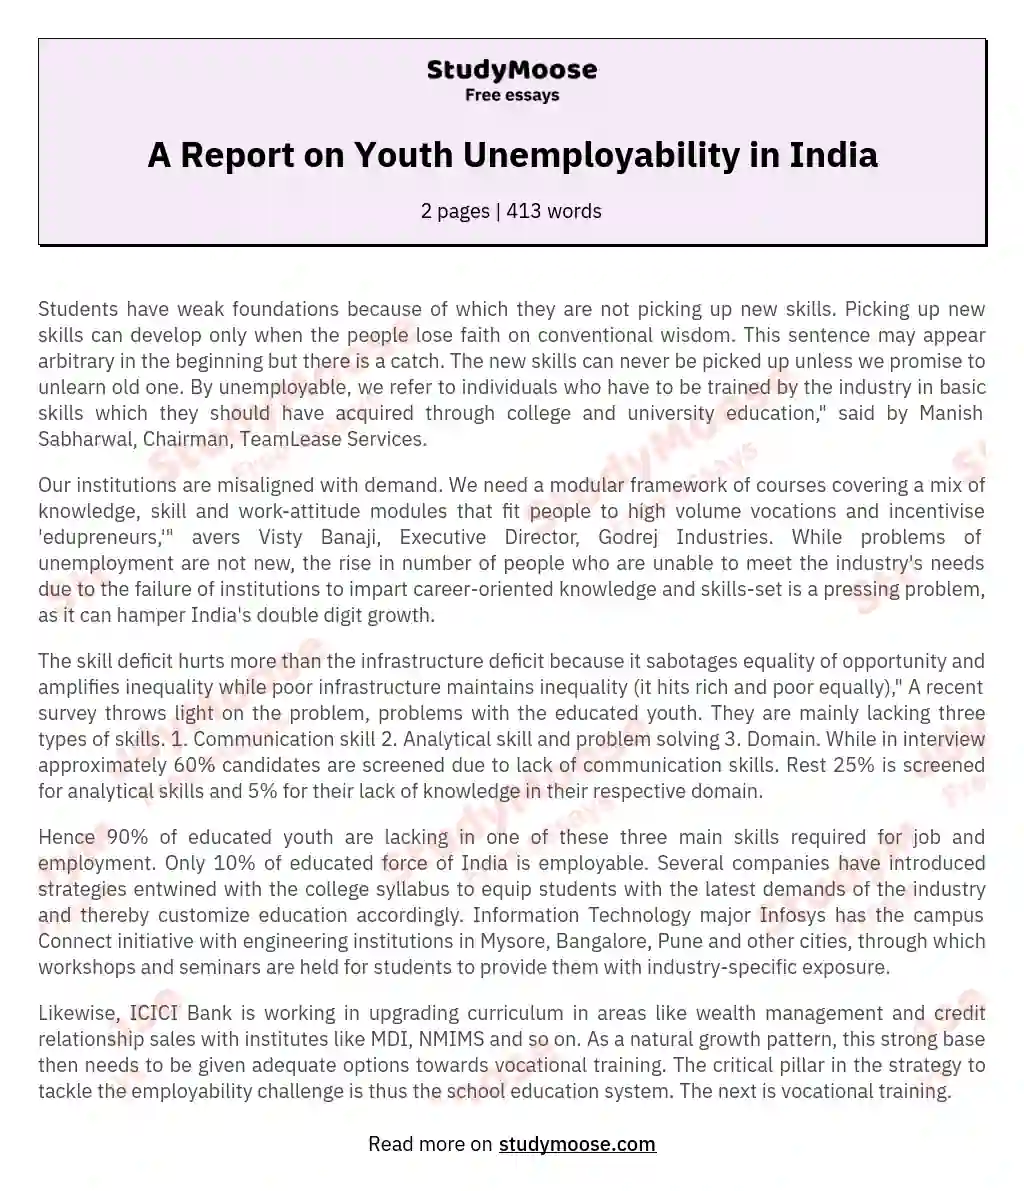 A Report on Youth Unemployability in India essay